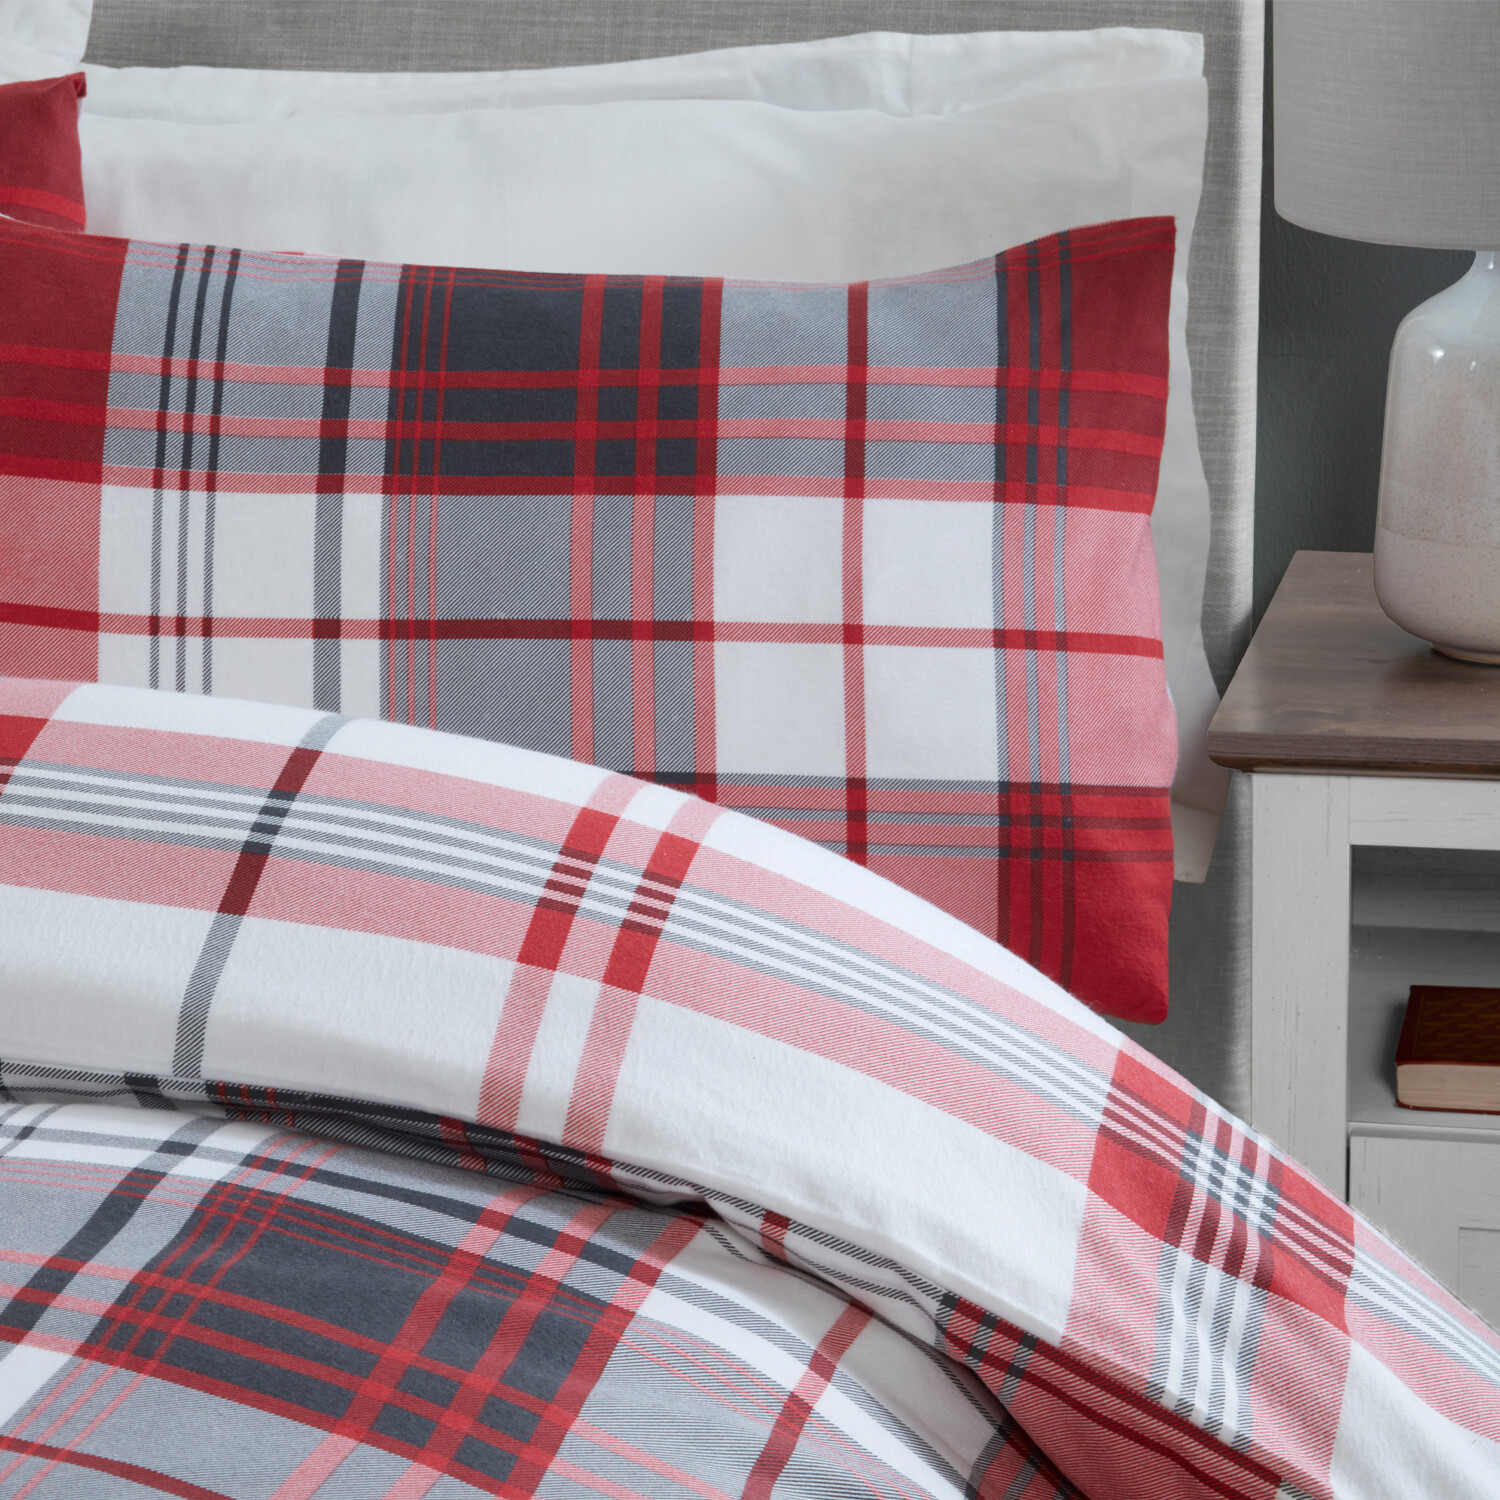 Hamilton Grey Check Duvet Cover and Pillowcase Set - Red / Super King size Image 5